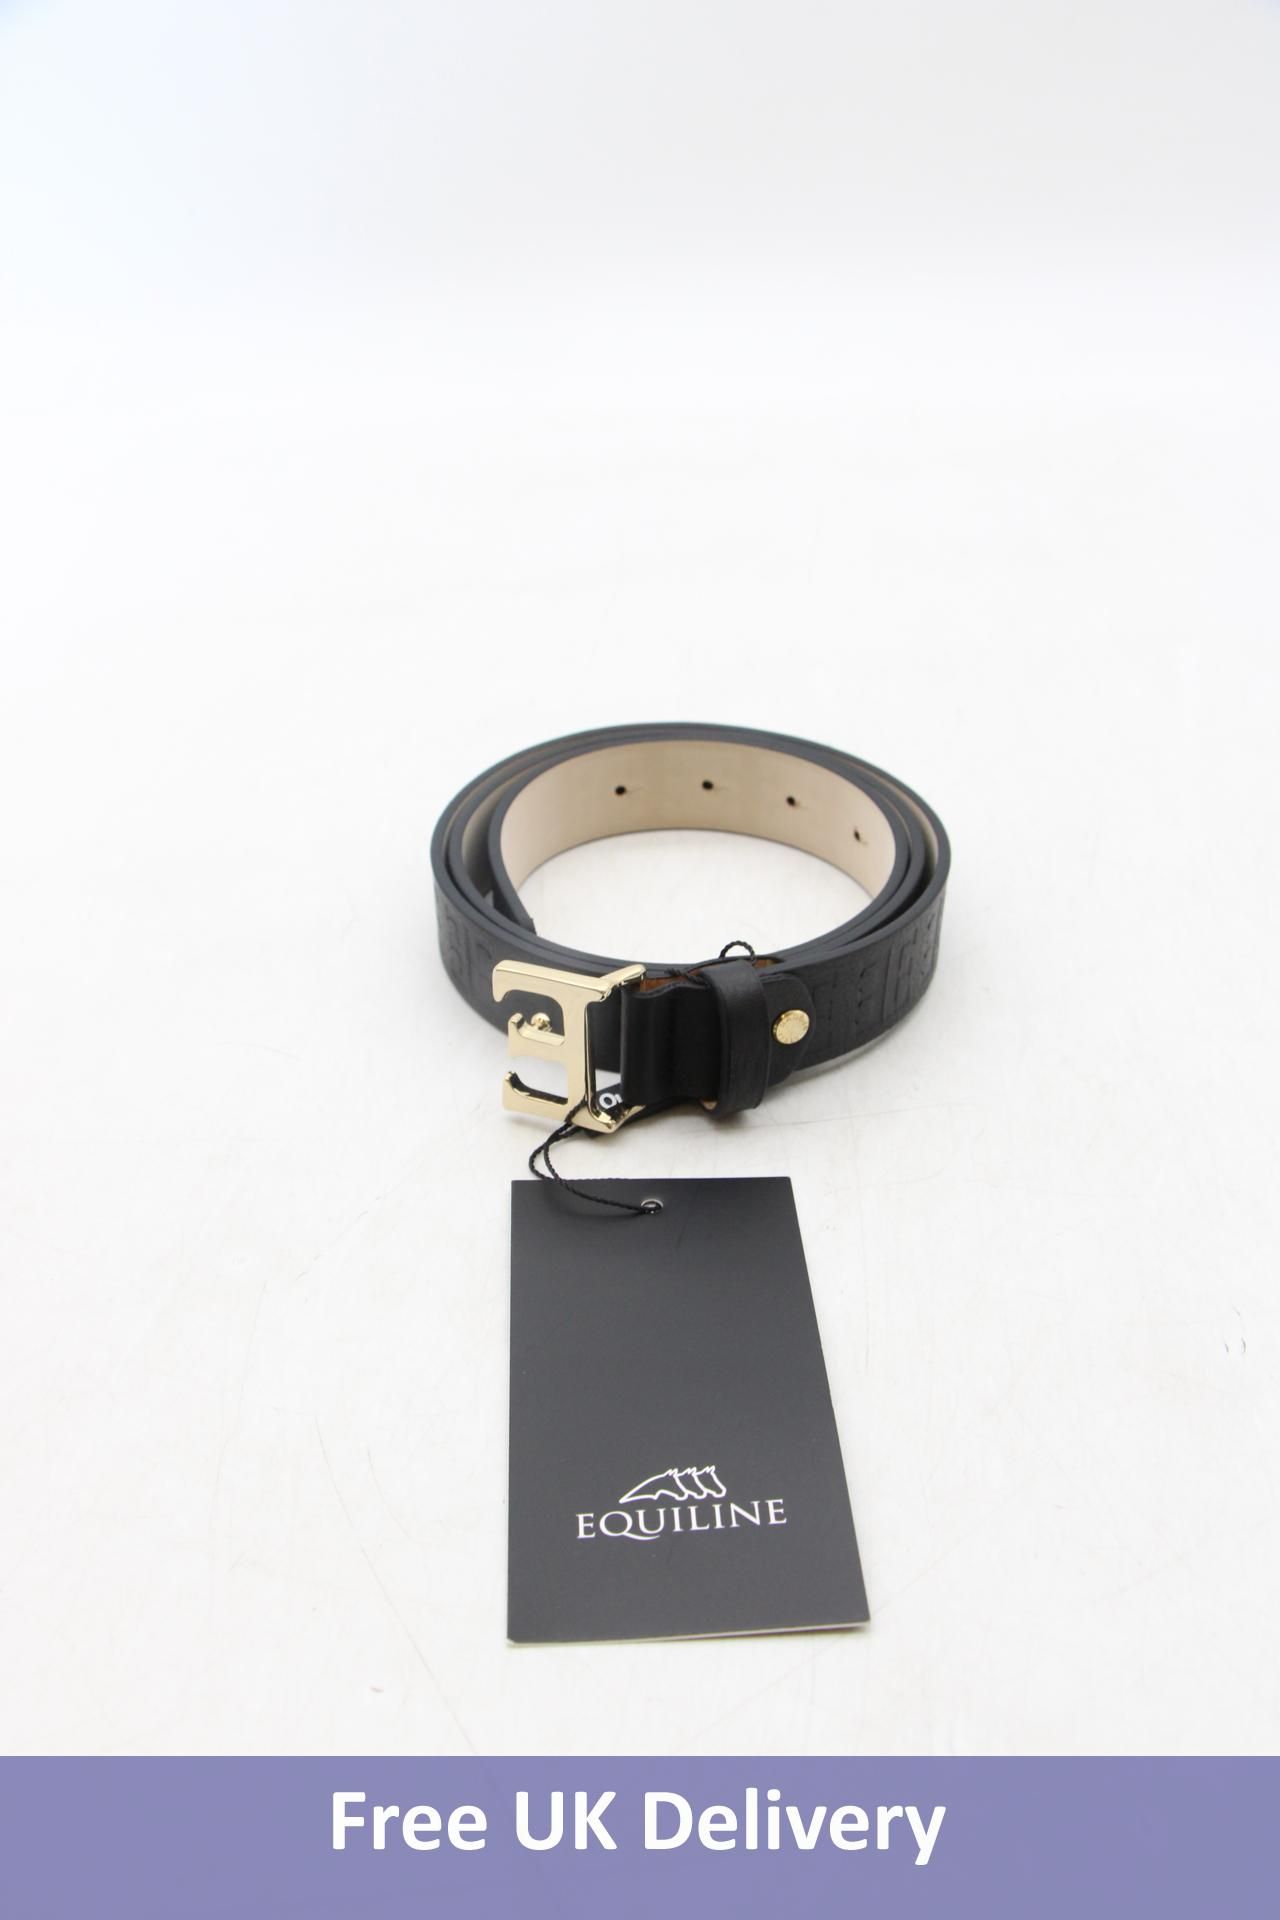 Equiline Real Leather Belt with E Logo, Black, One Size